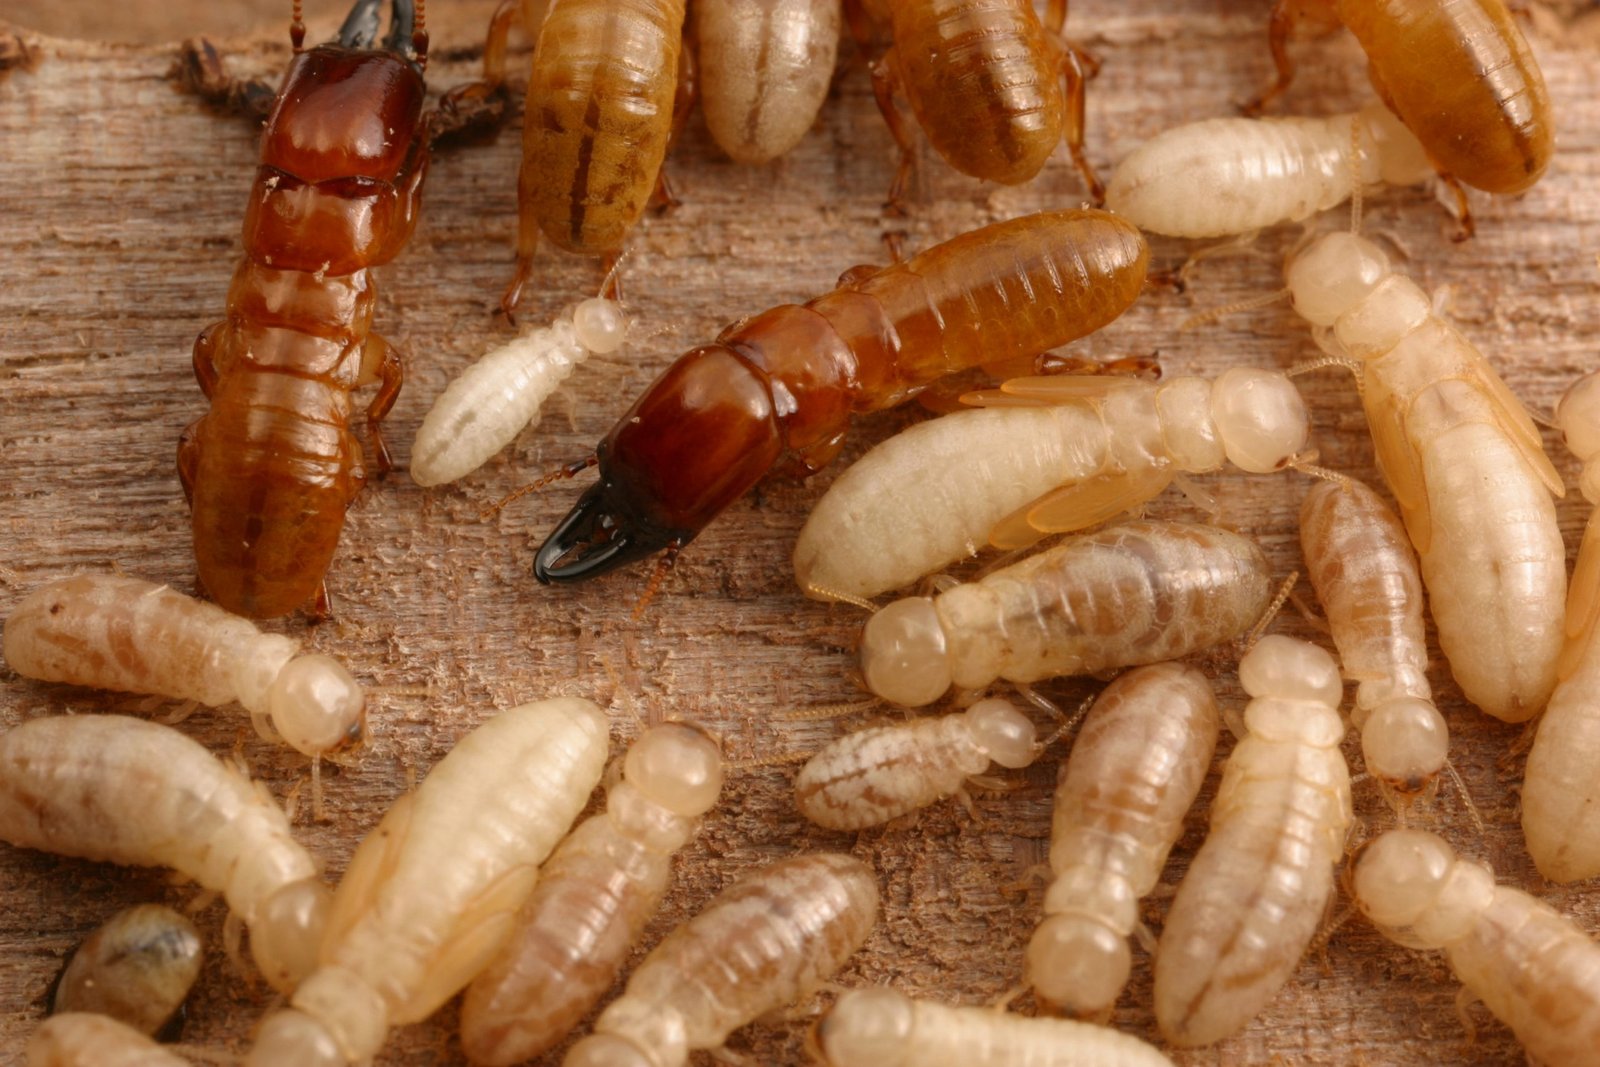 Scientists Develop New, More Effective, and Non-Toxic Way To Kill Termites